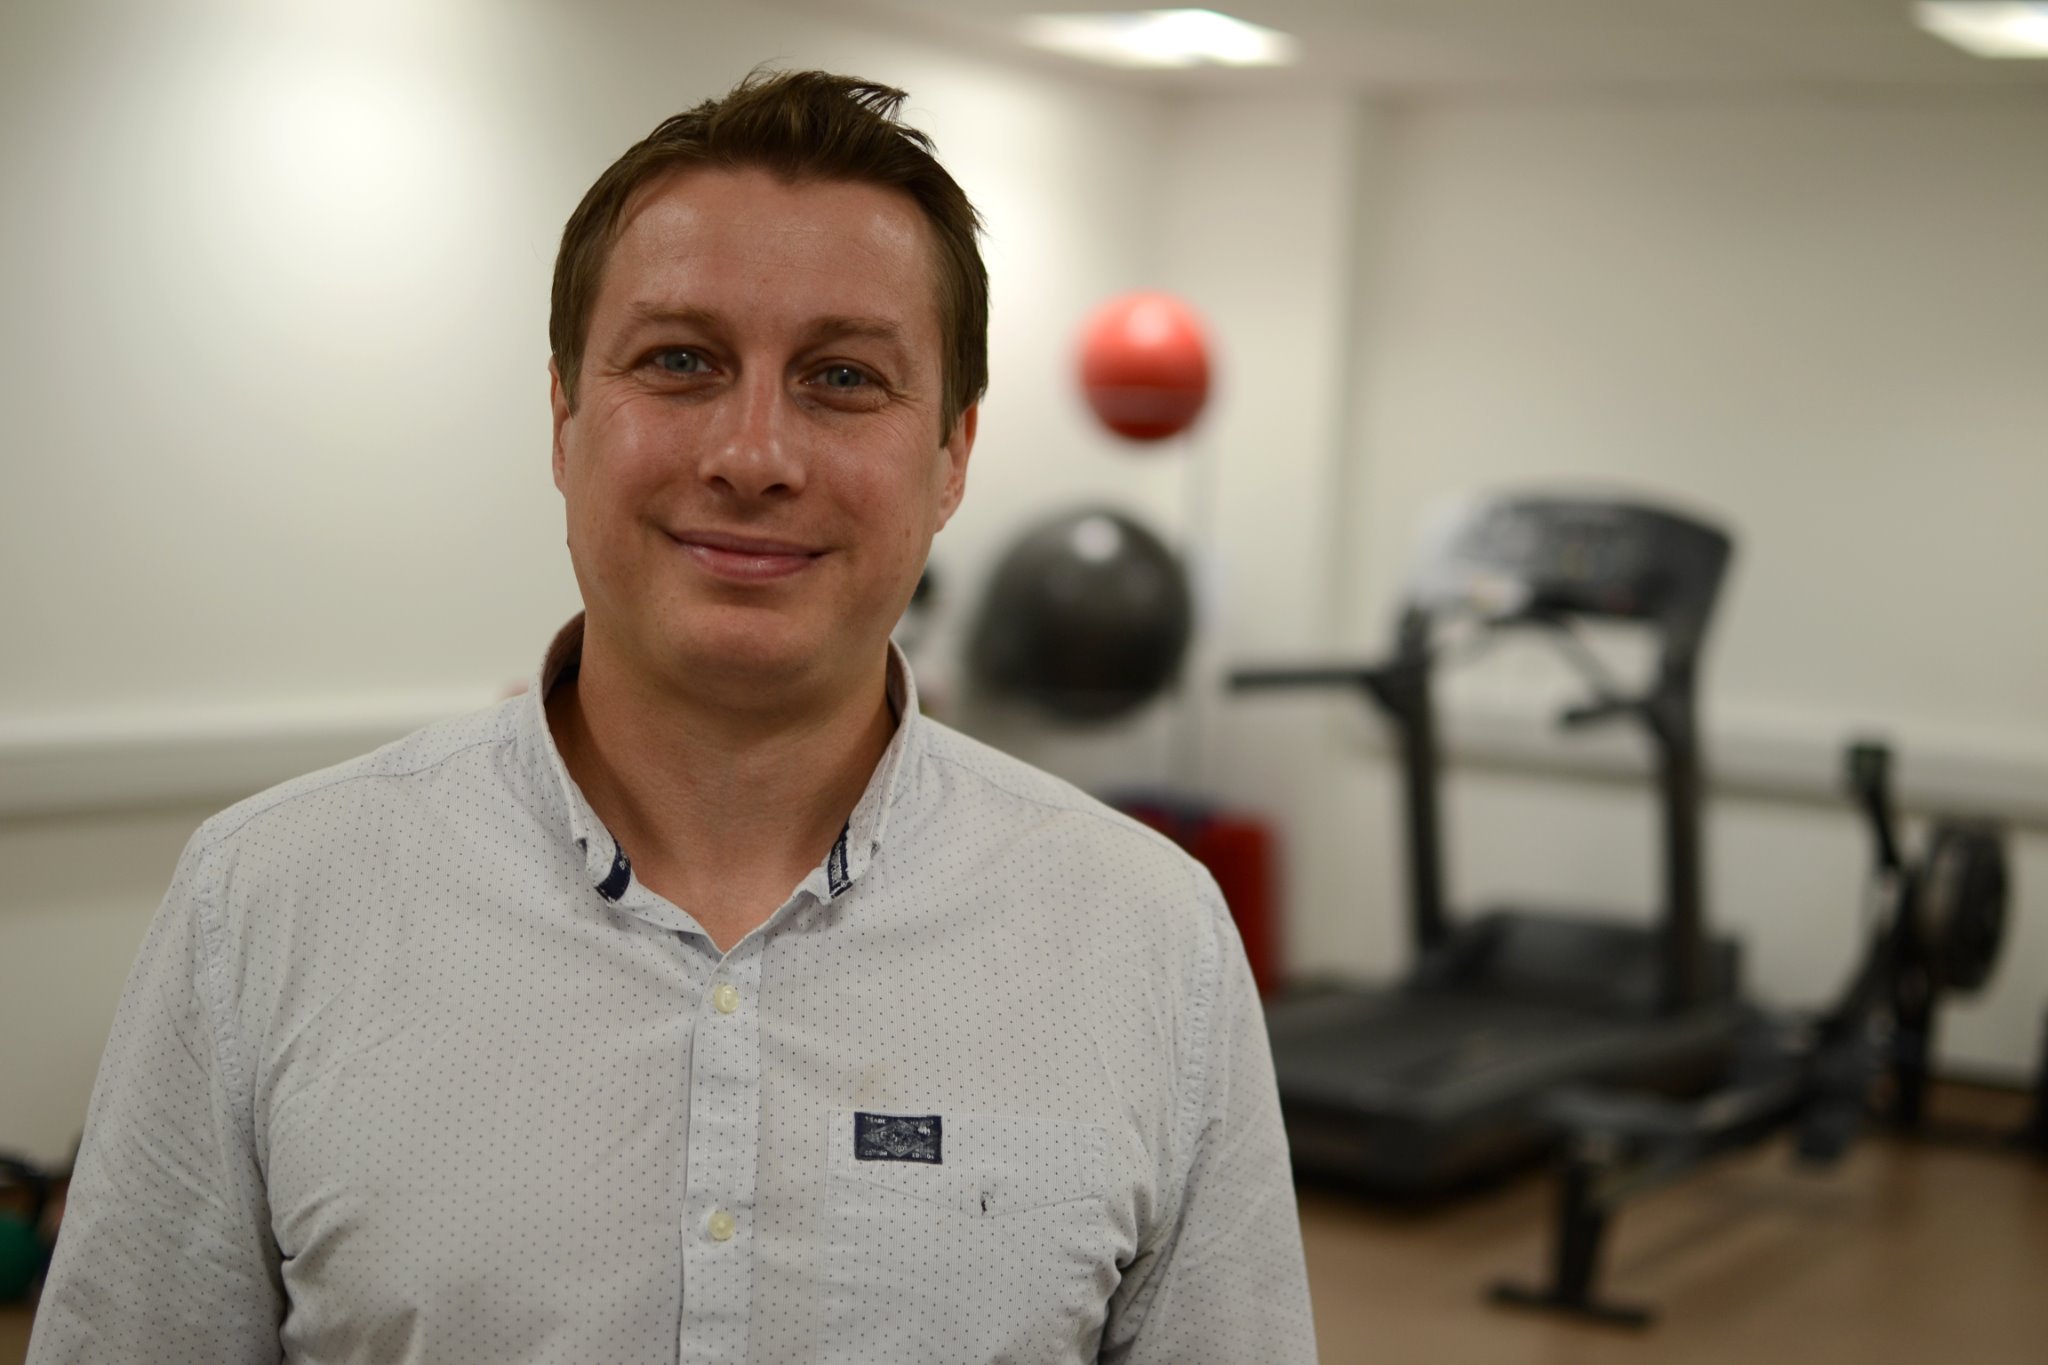 MSK Physiotherapist & Senior Lecturer at the University of Essex. PhD in tendon-related pain